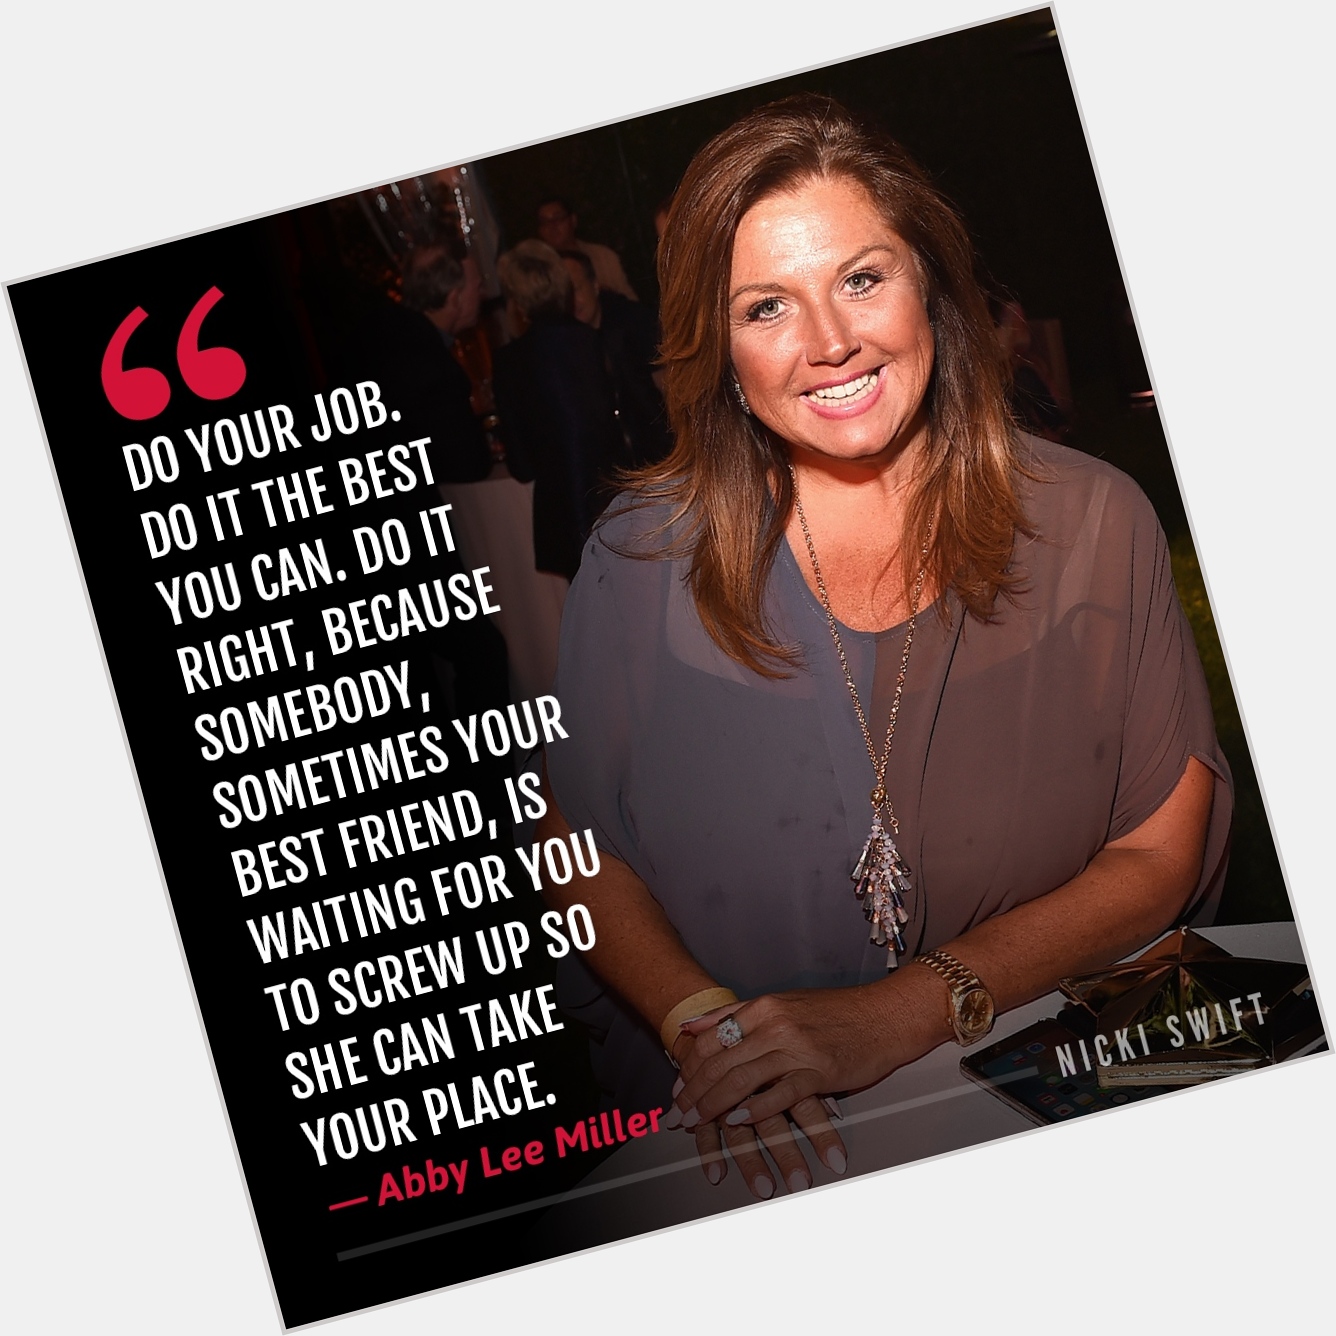 Happy birthday to the iconic star Abby Lee Miller! 